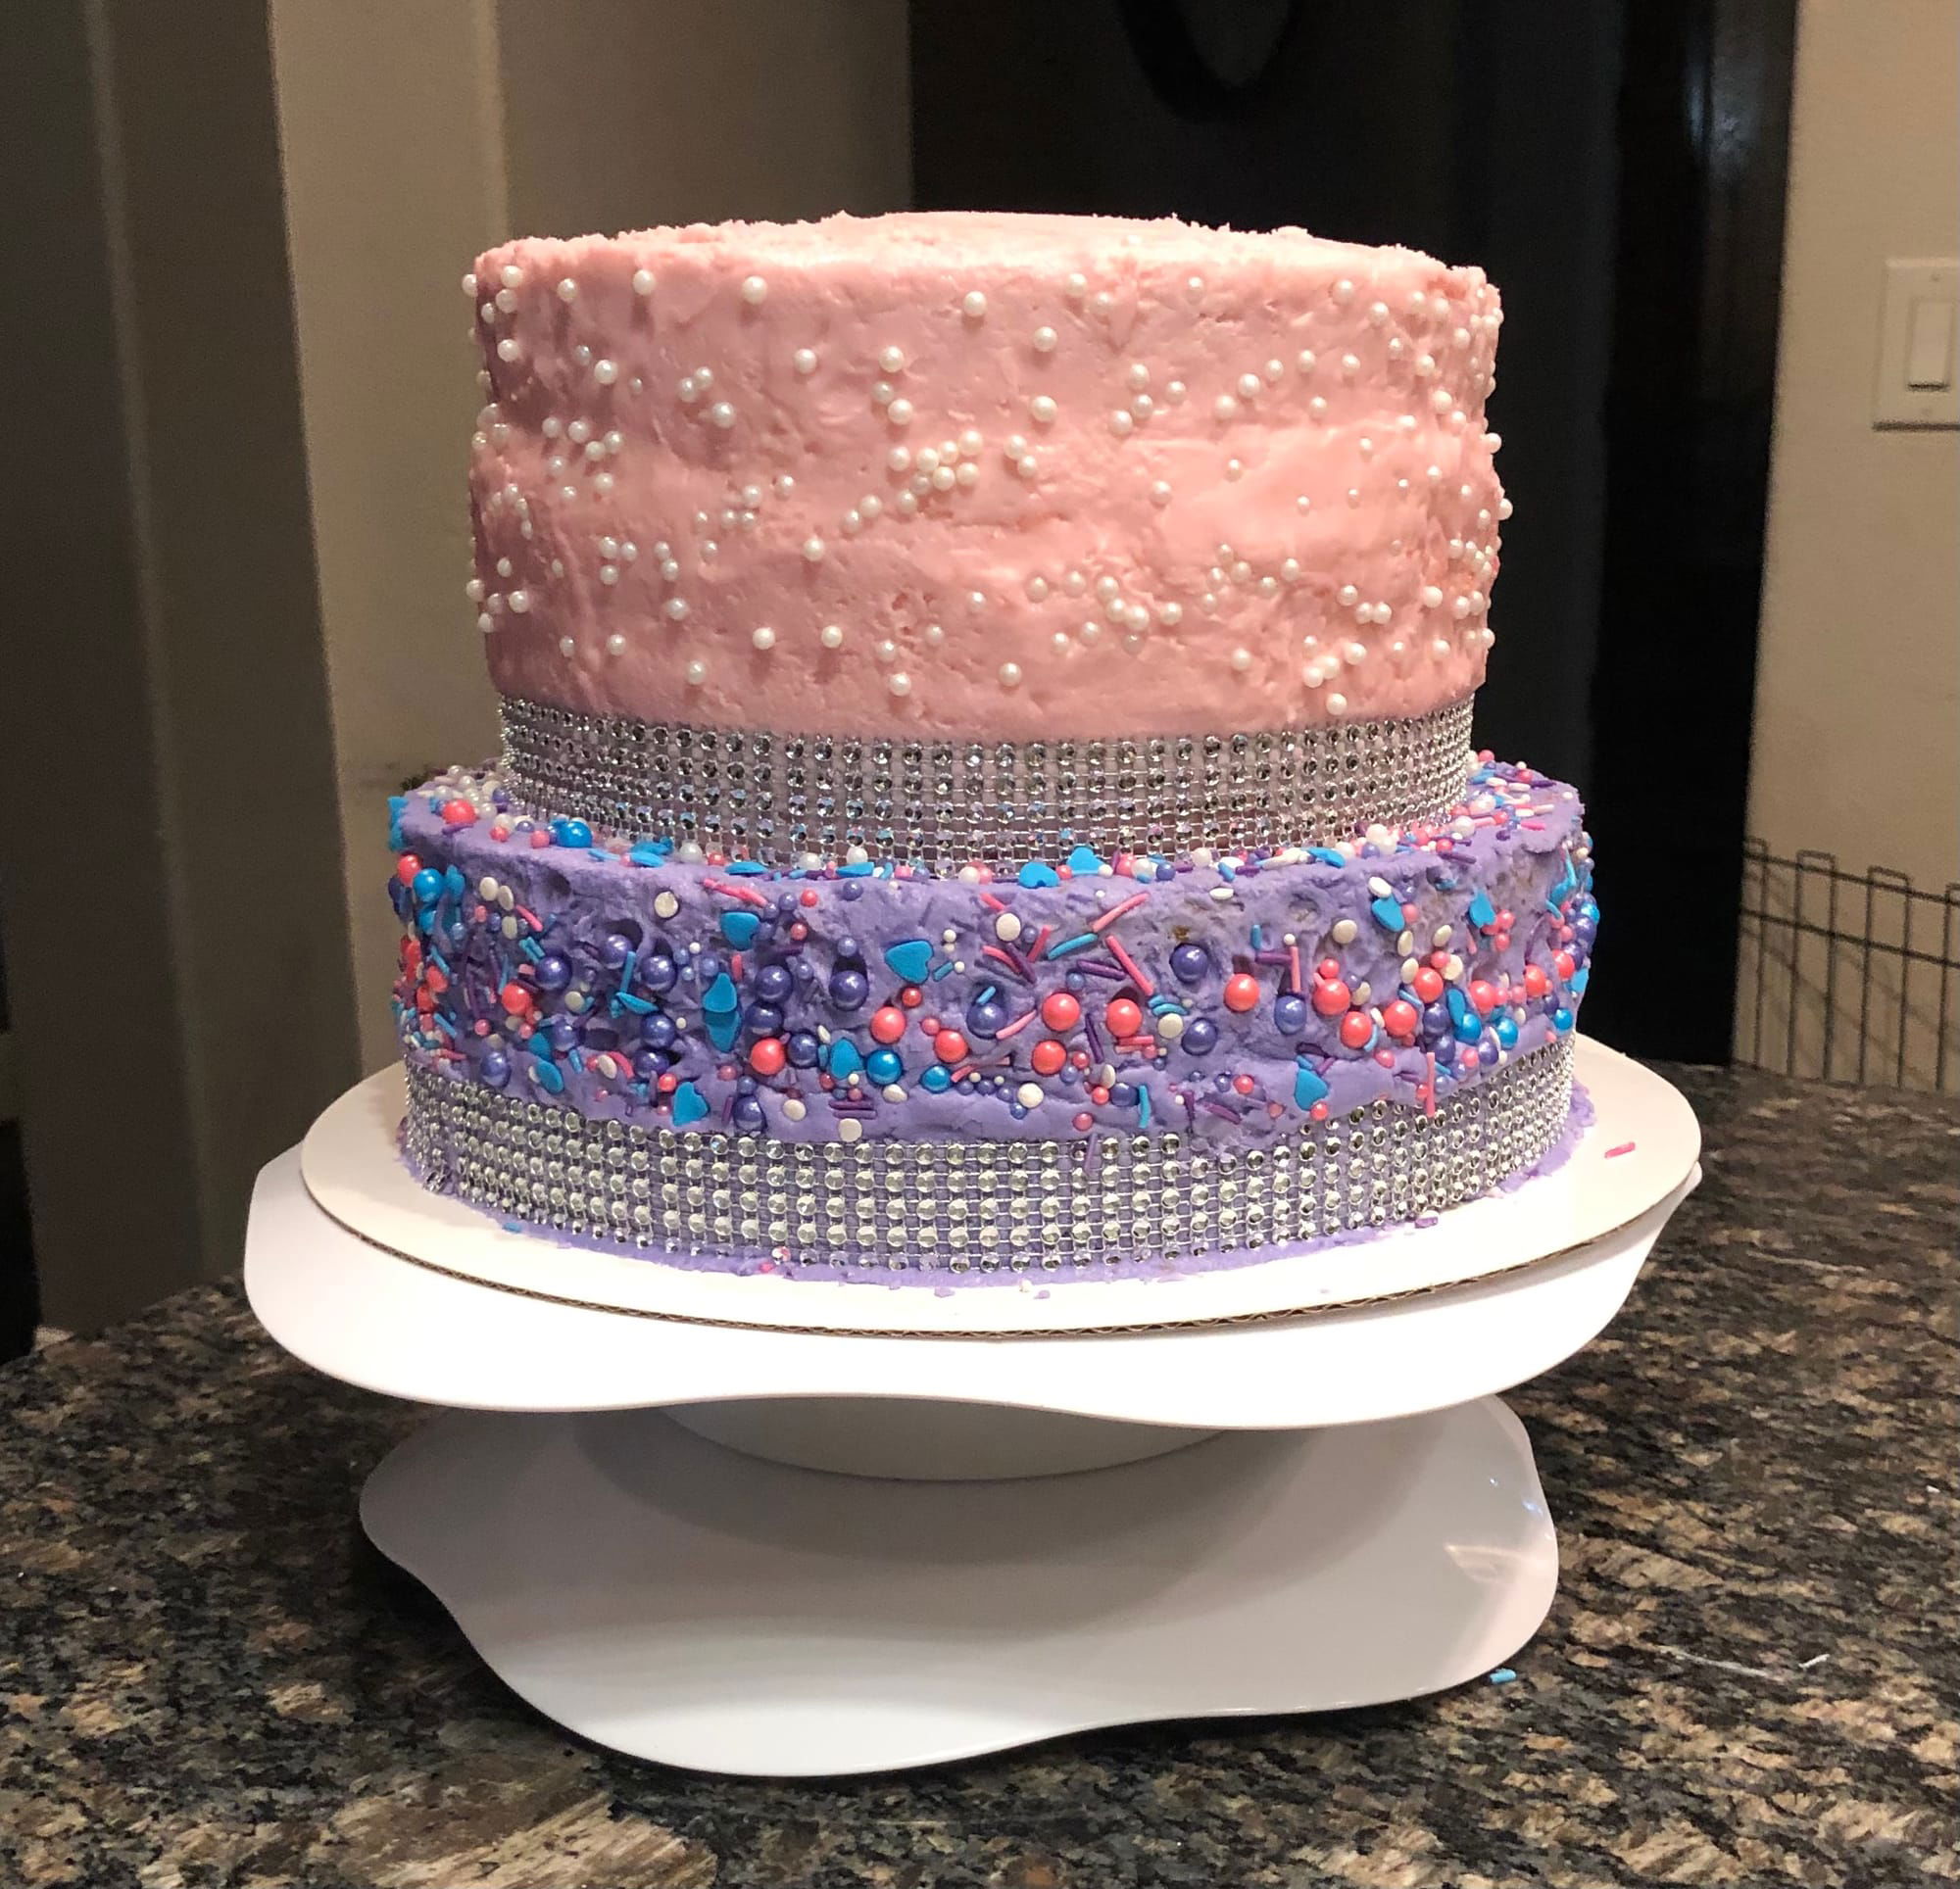 5 Layer 2 Tier Vanilla And Strawberry Cake With Vanilla Buttercream Frosting